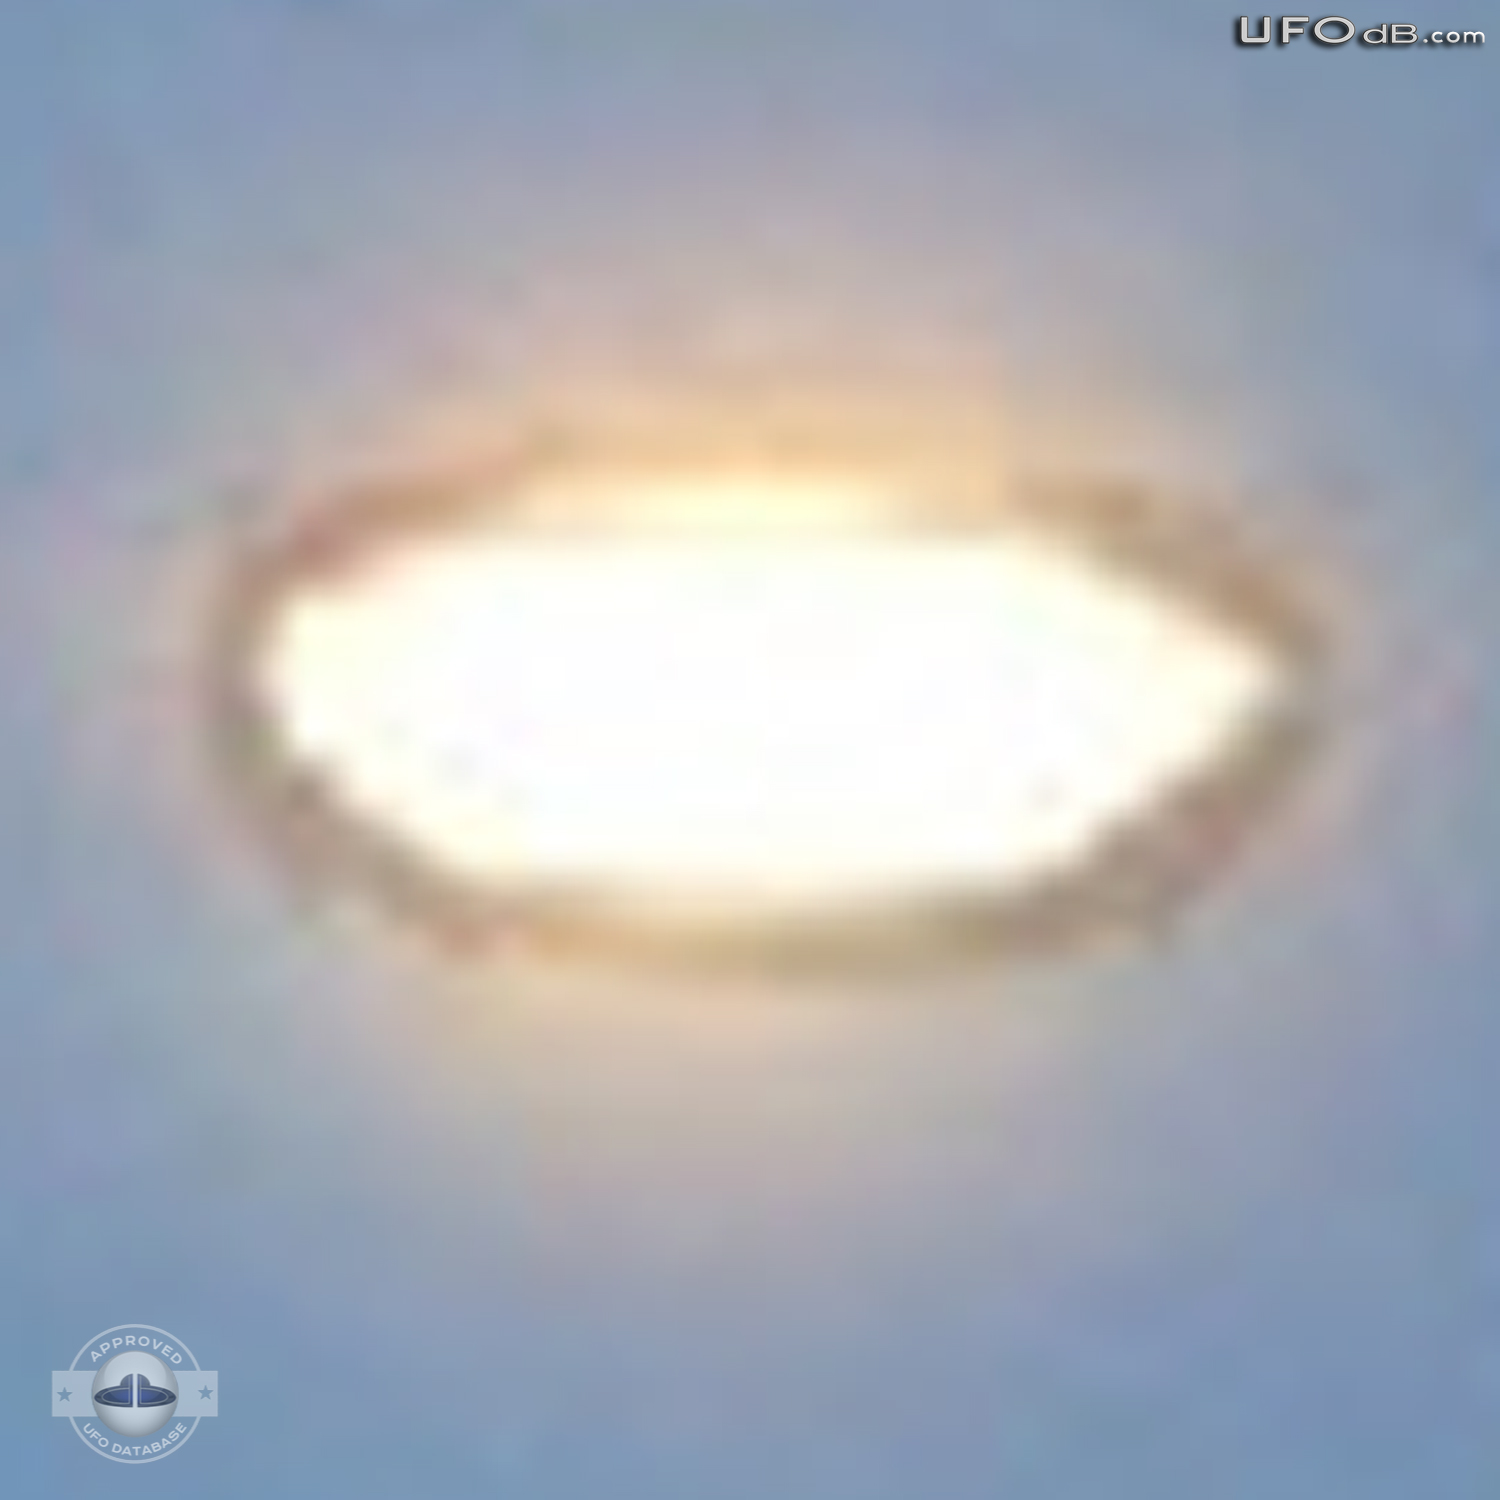 Darting UFO photographed from moving car | Bryncethin, Wales, UK 2011 UFO Picture #275-5